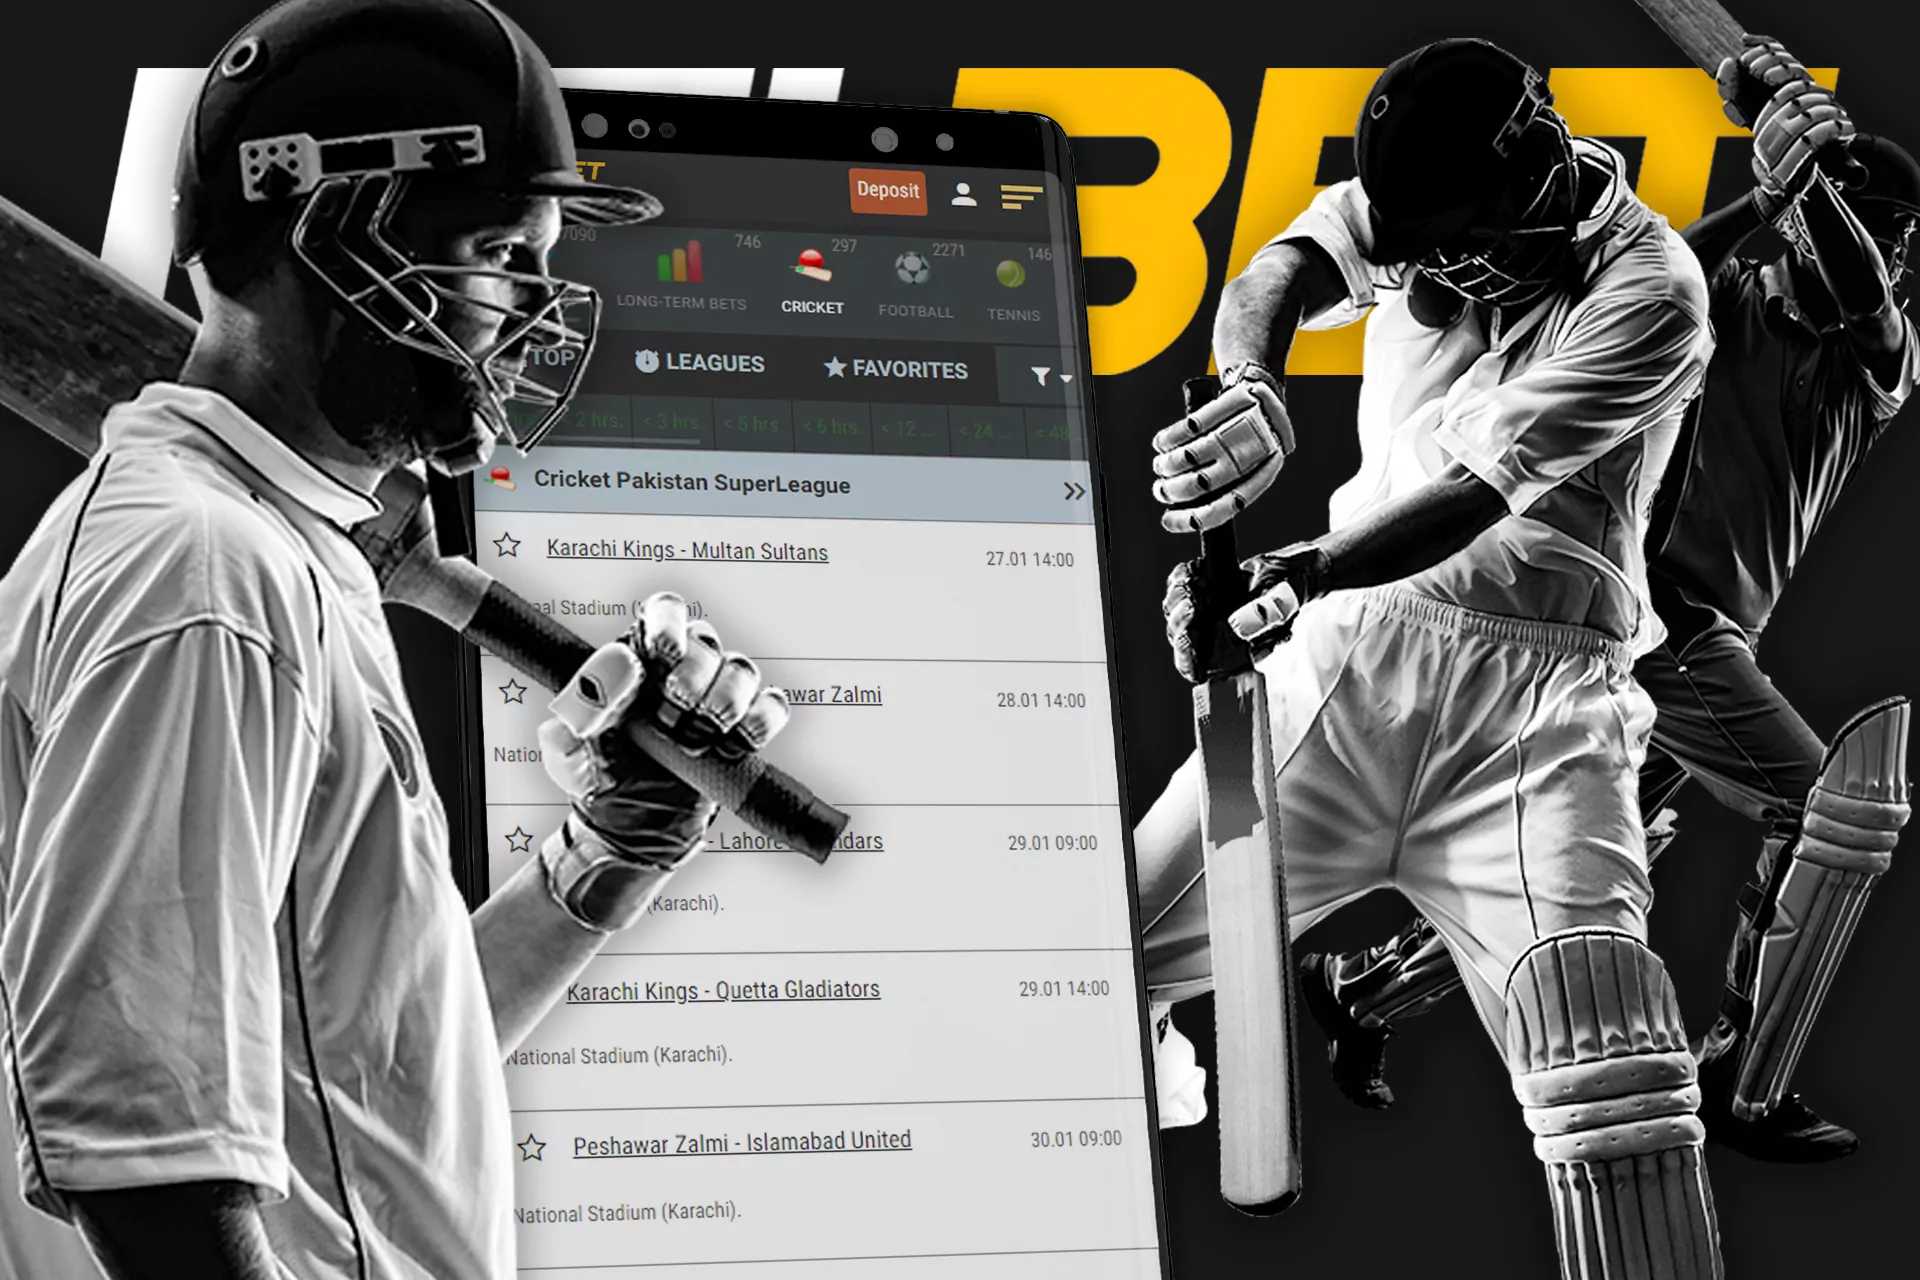 Place bets on cricket tournaments in the Melbet app.